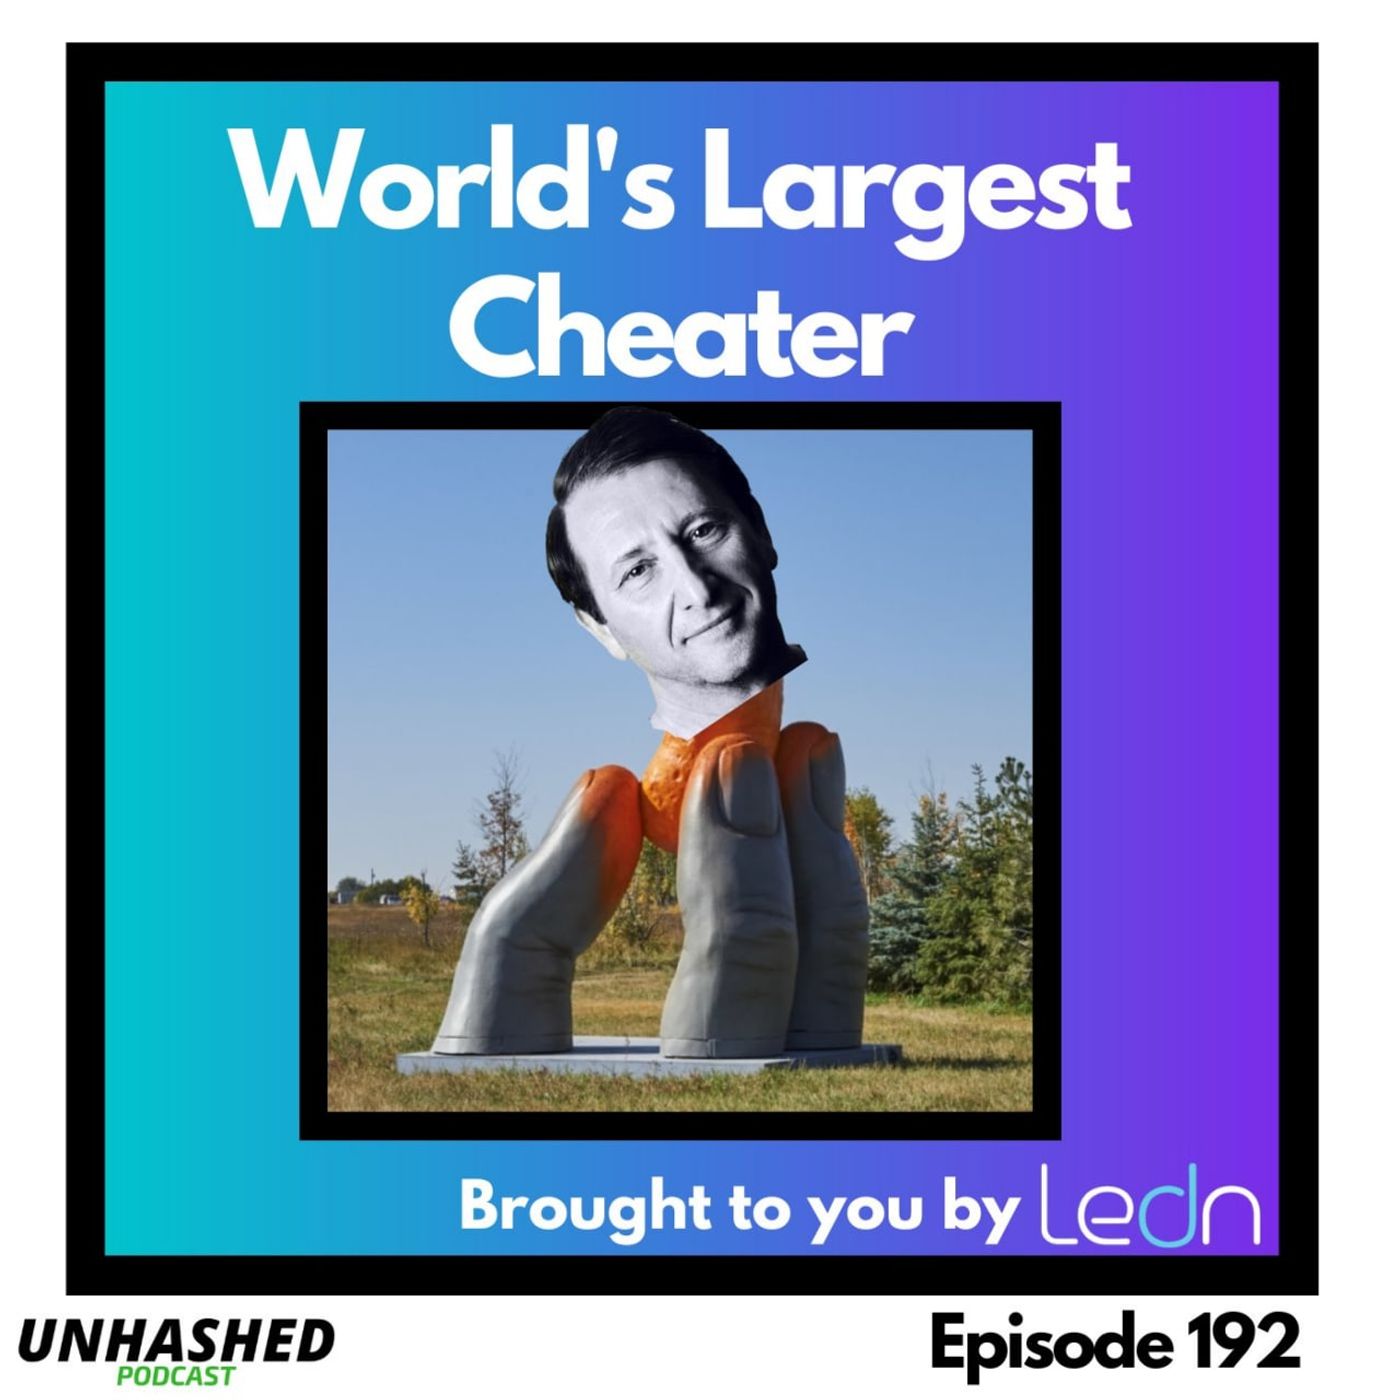 World's Largest Cheater